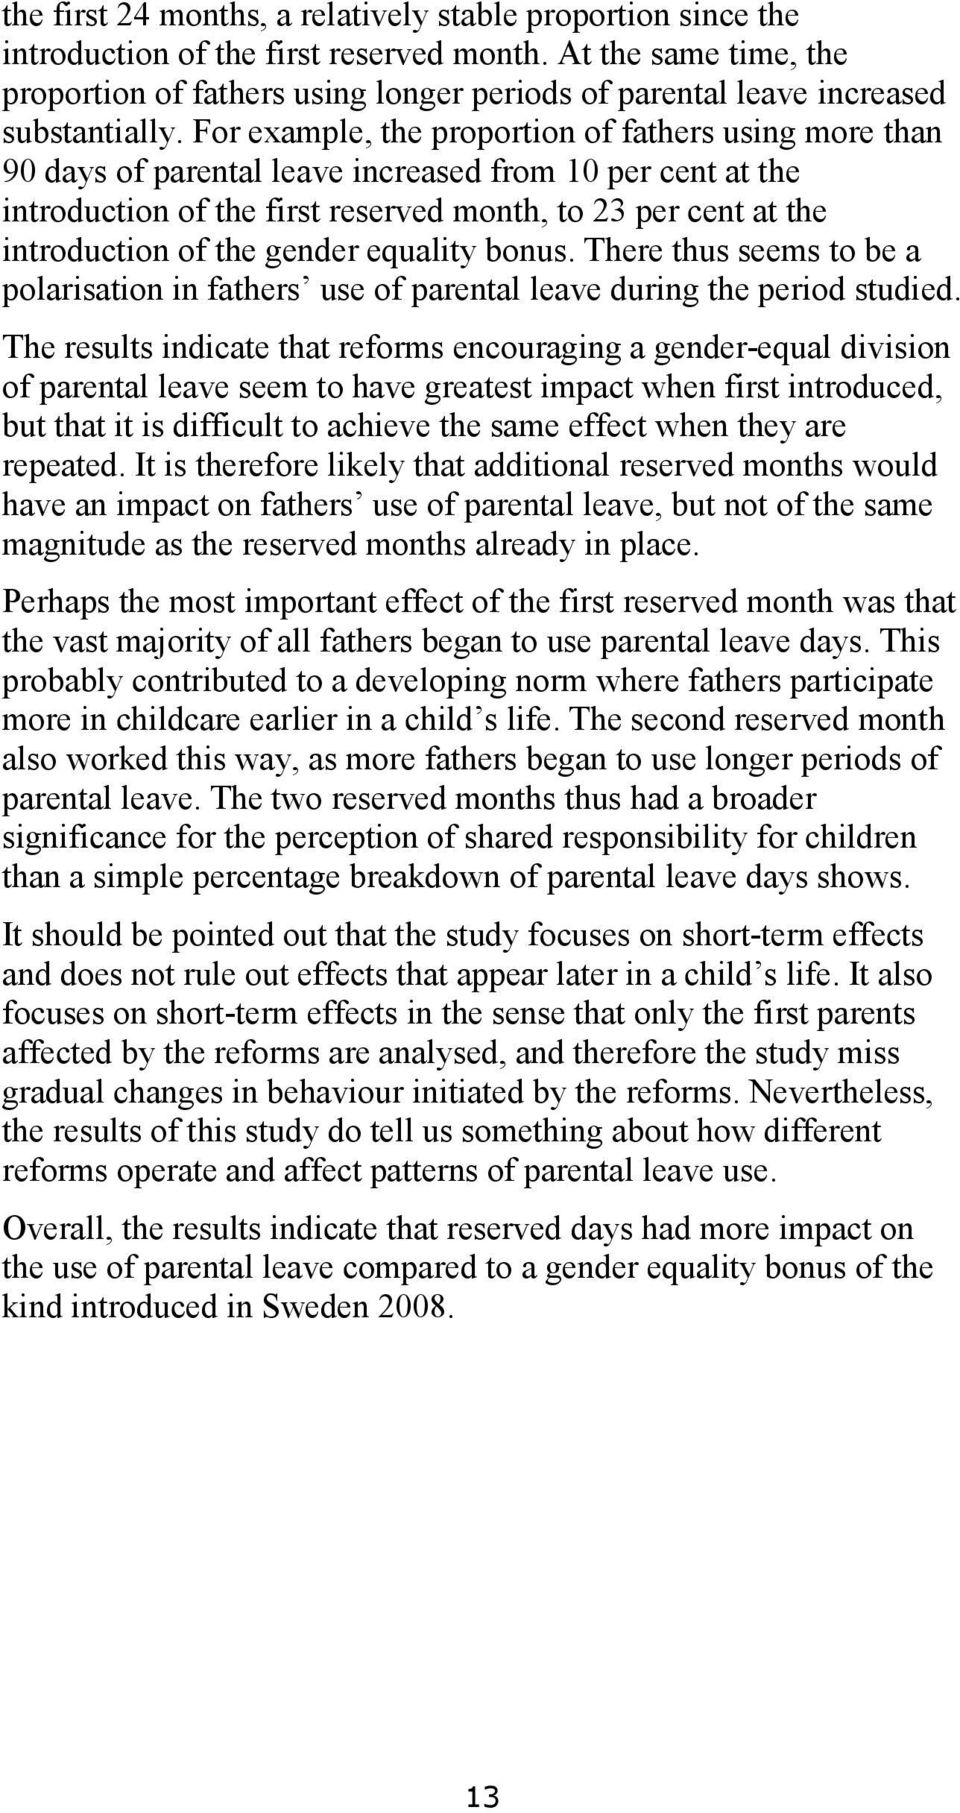 For example, the proportion of fathers using more than 90 days of parental leave increased from 10 per cent at the introduction of the first reserved month, to 23 per cent at the introduction of the